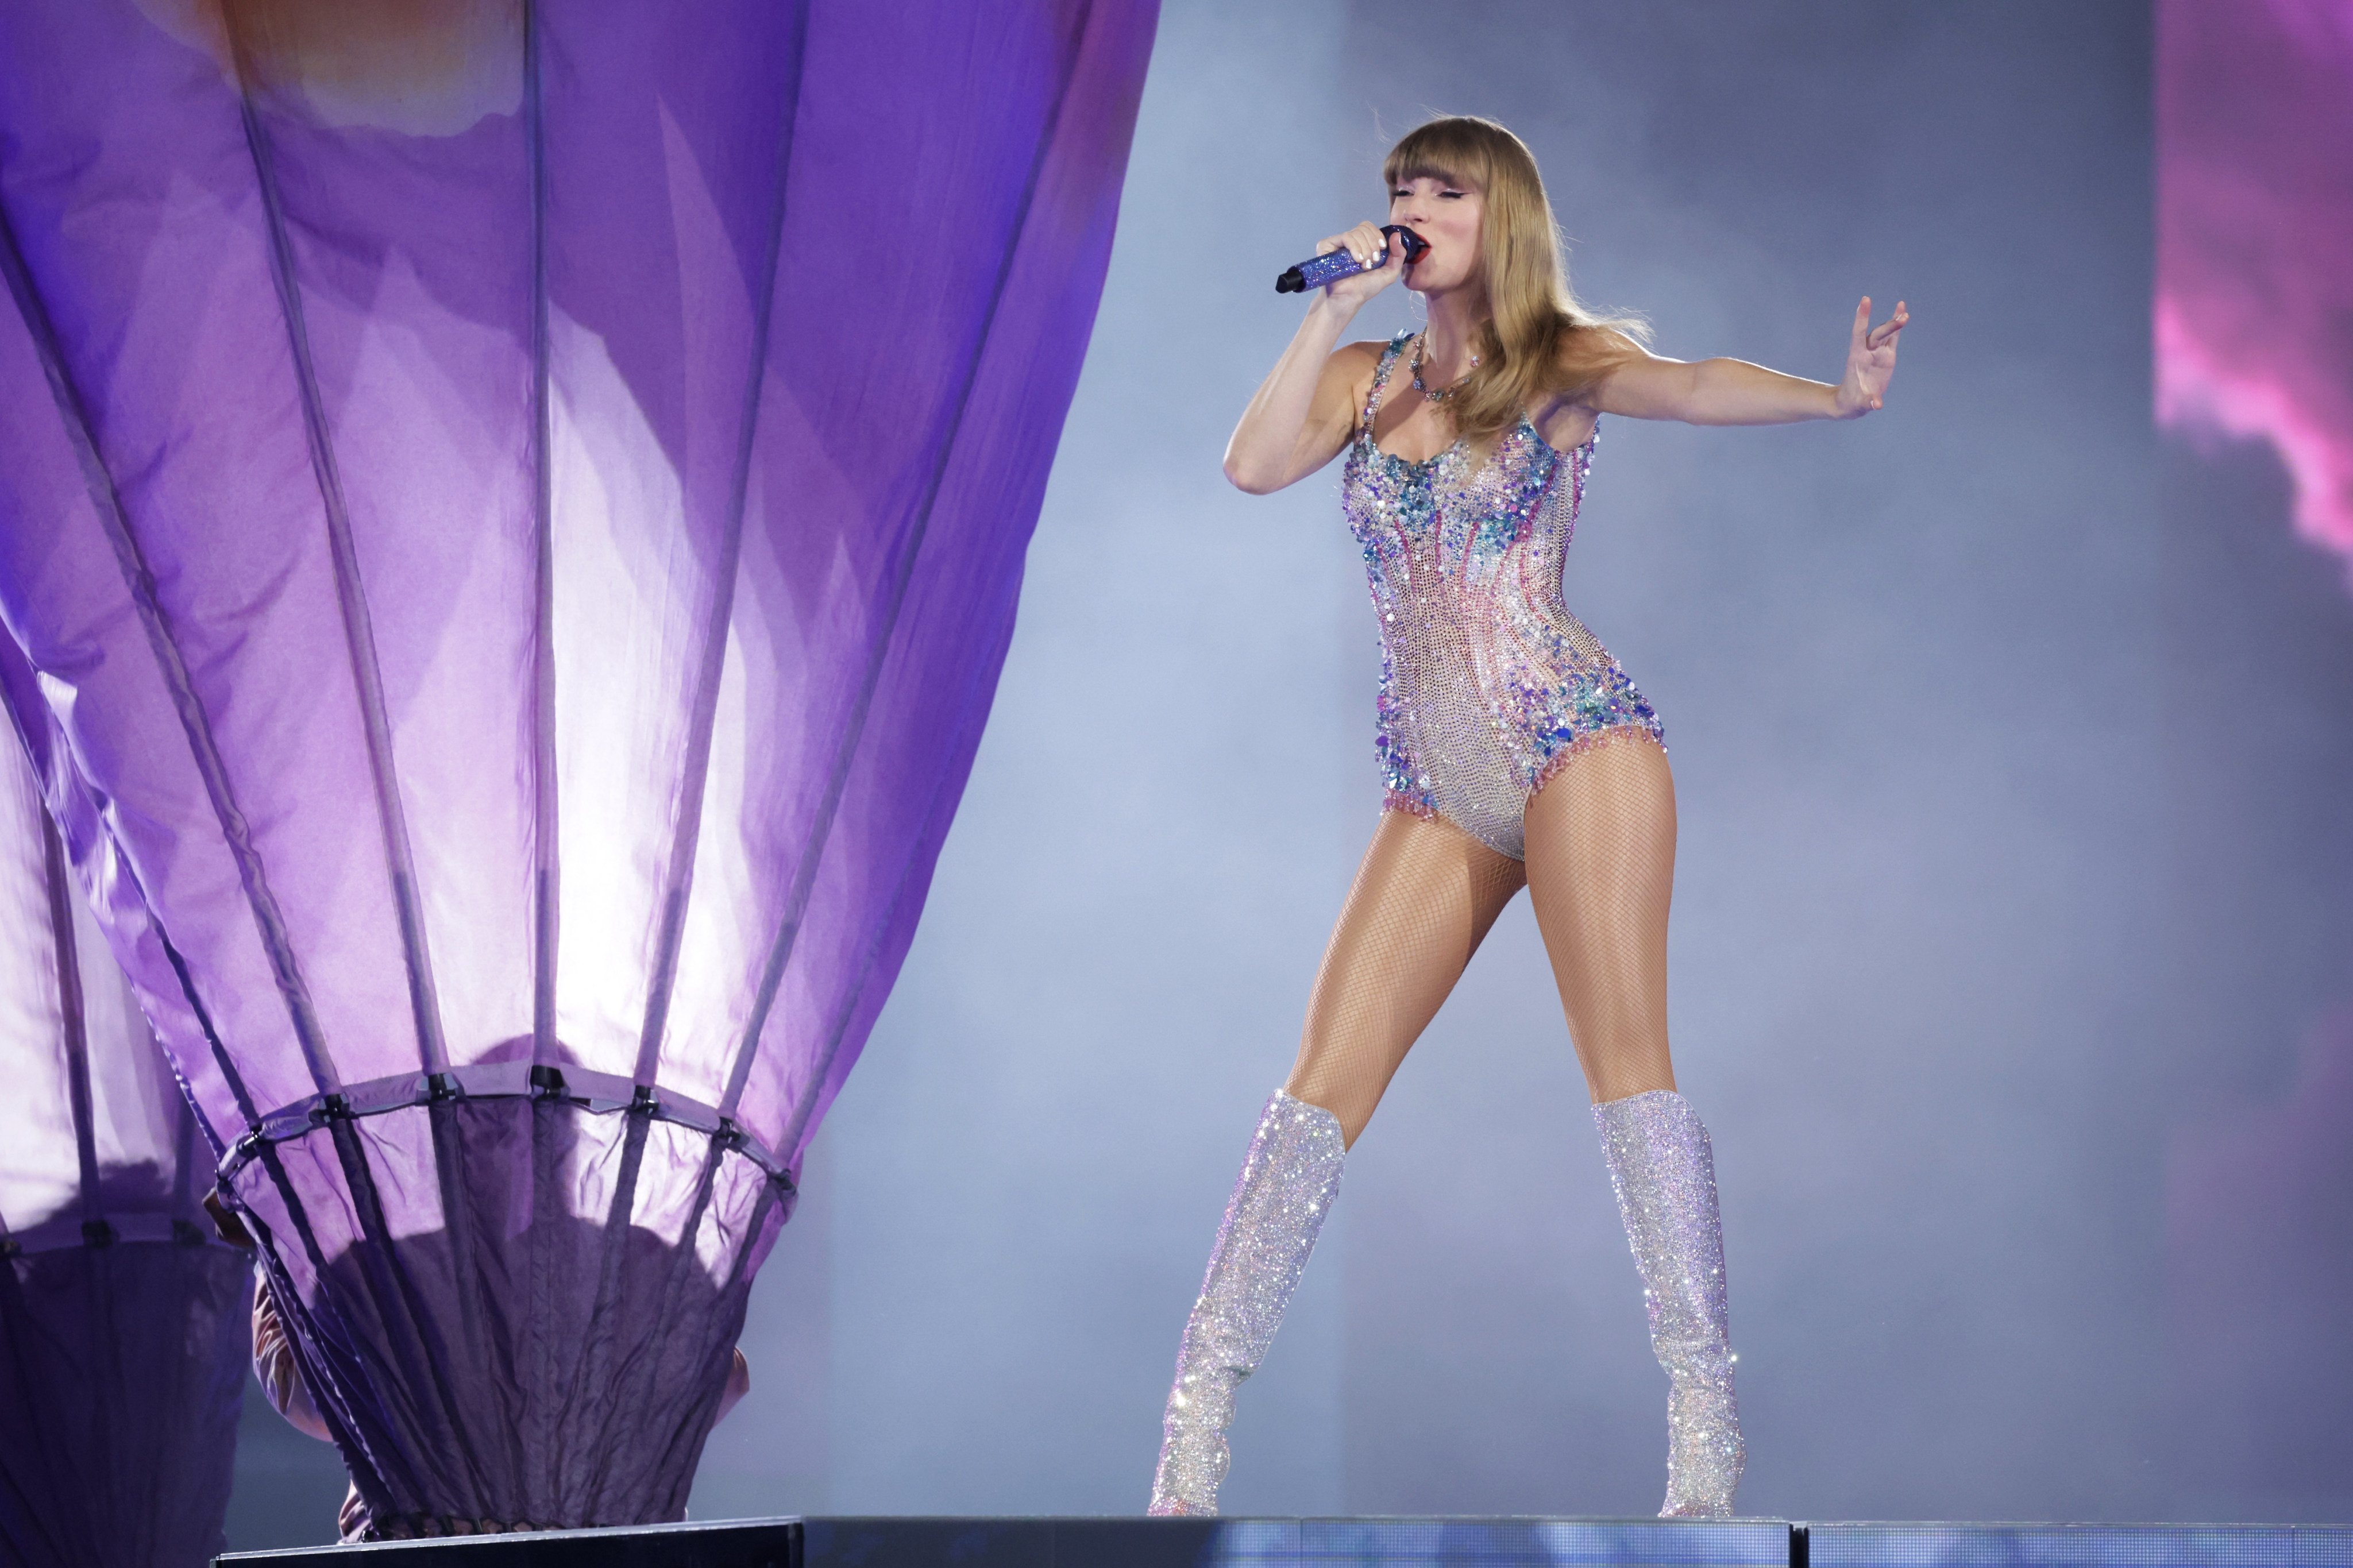 Taylor Swift performs at Singapore’s National Stadium on March 2. The singer’s agreement with the Singapore government to only perform in the city state in exchange for a generous grant has rankled some regional governments and highlighted Hong Kong’s need to bolster its standing as a venue for international events. Photo: Getty Images